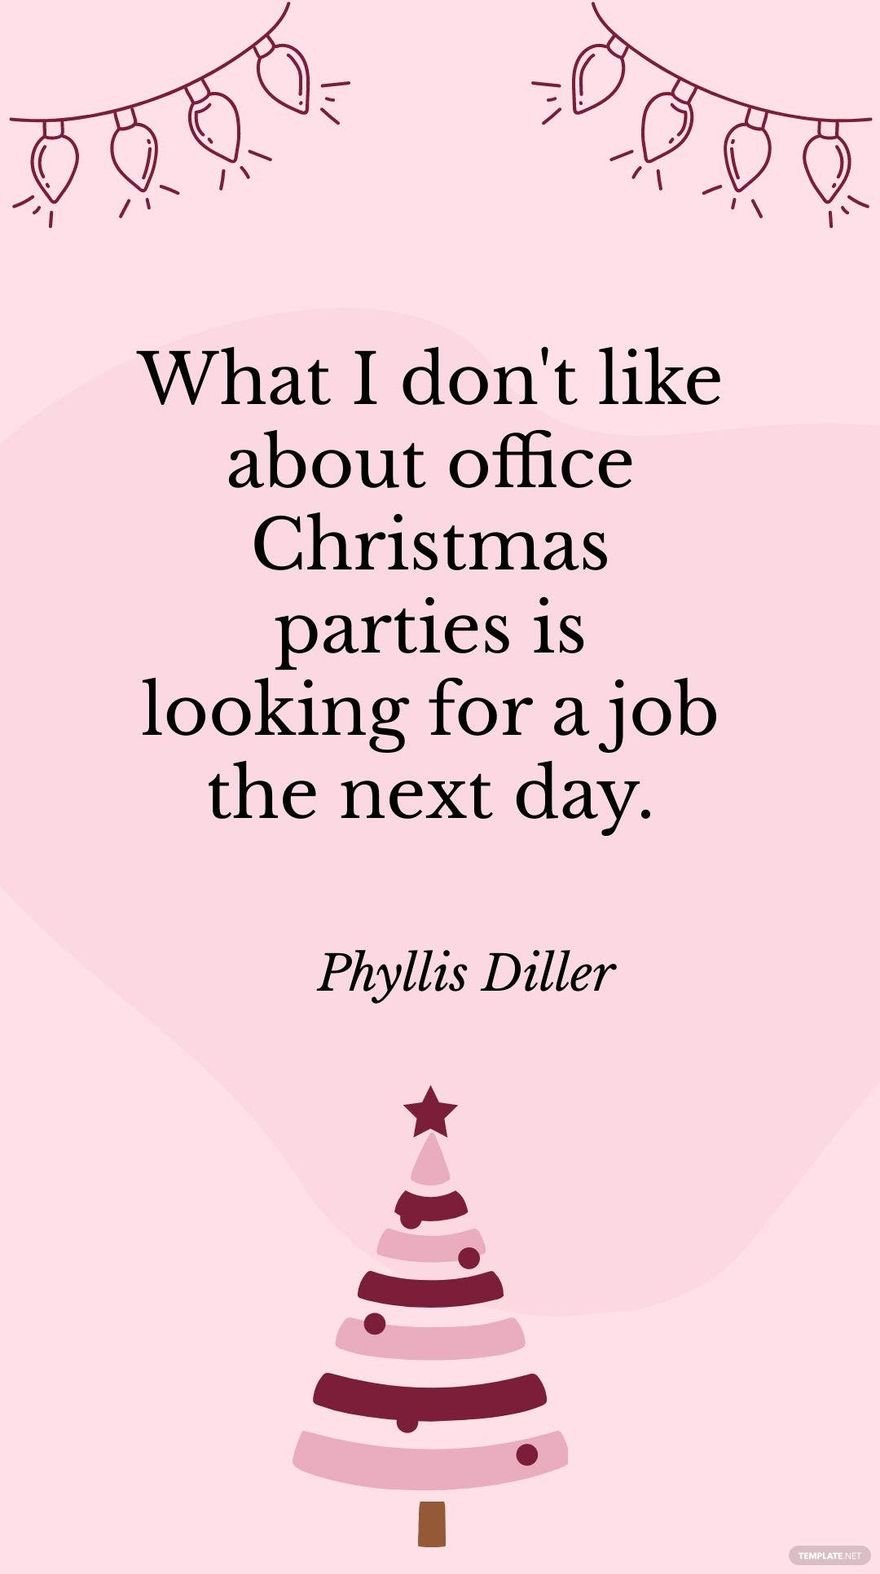 Phyllis Diller - What I don't like about office Christmas parties is looking for a job the next day.